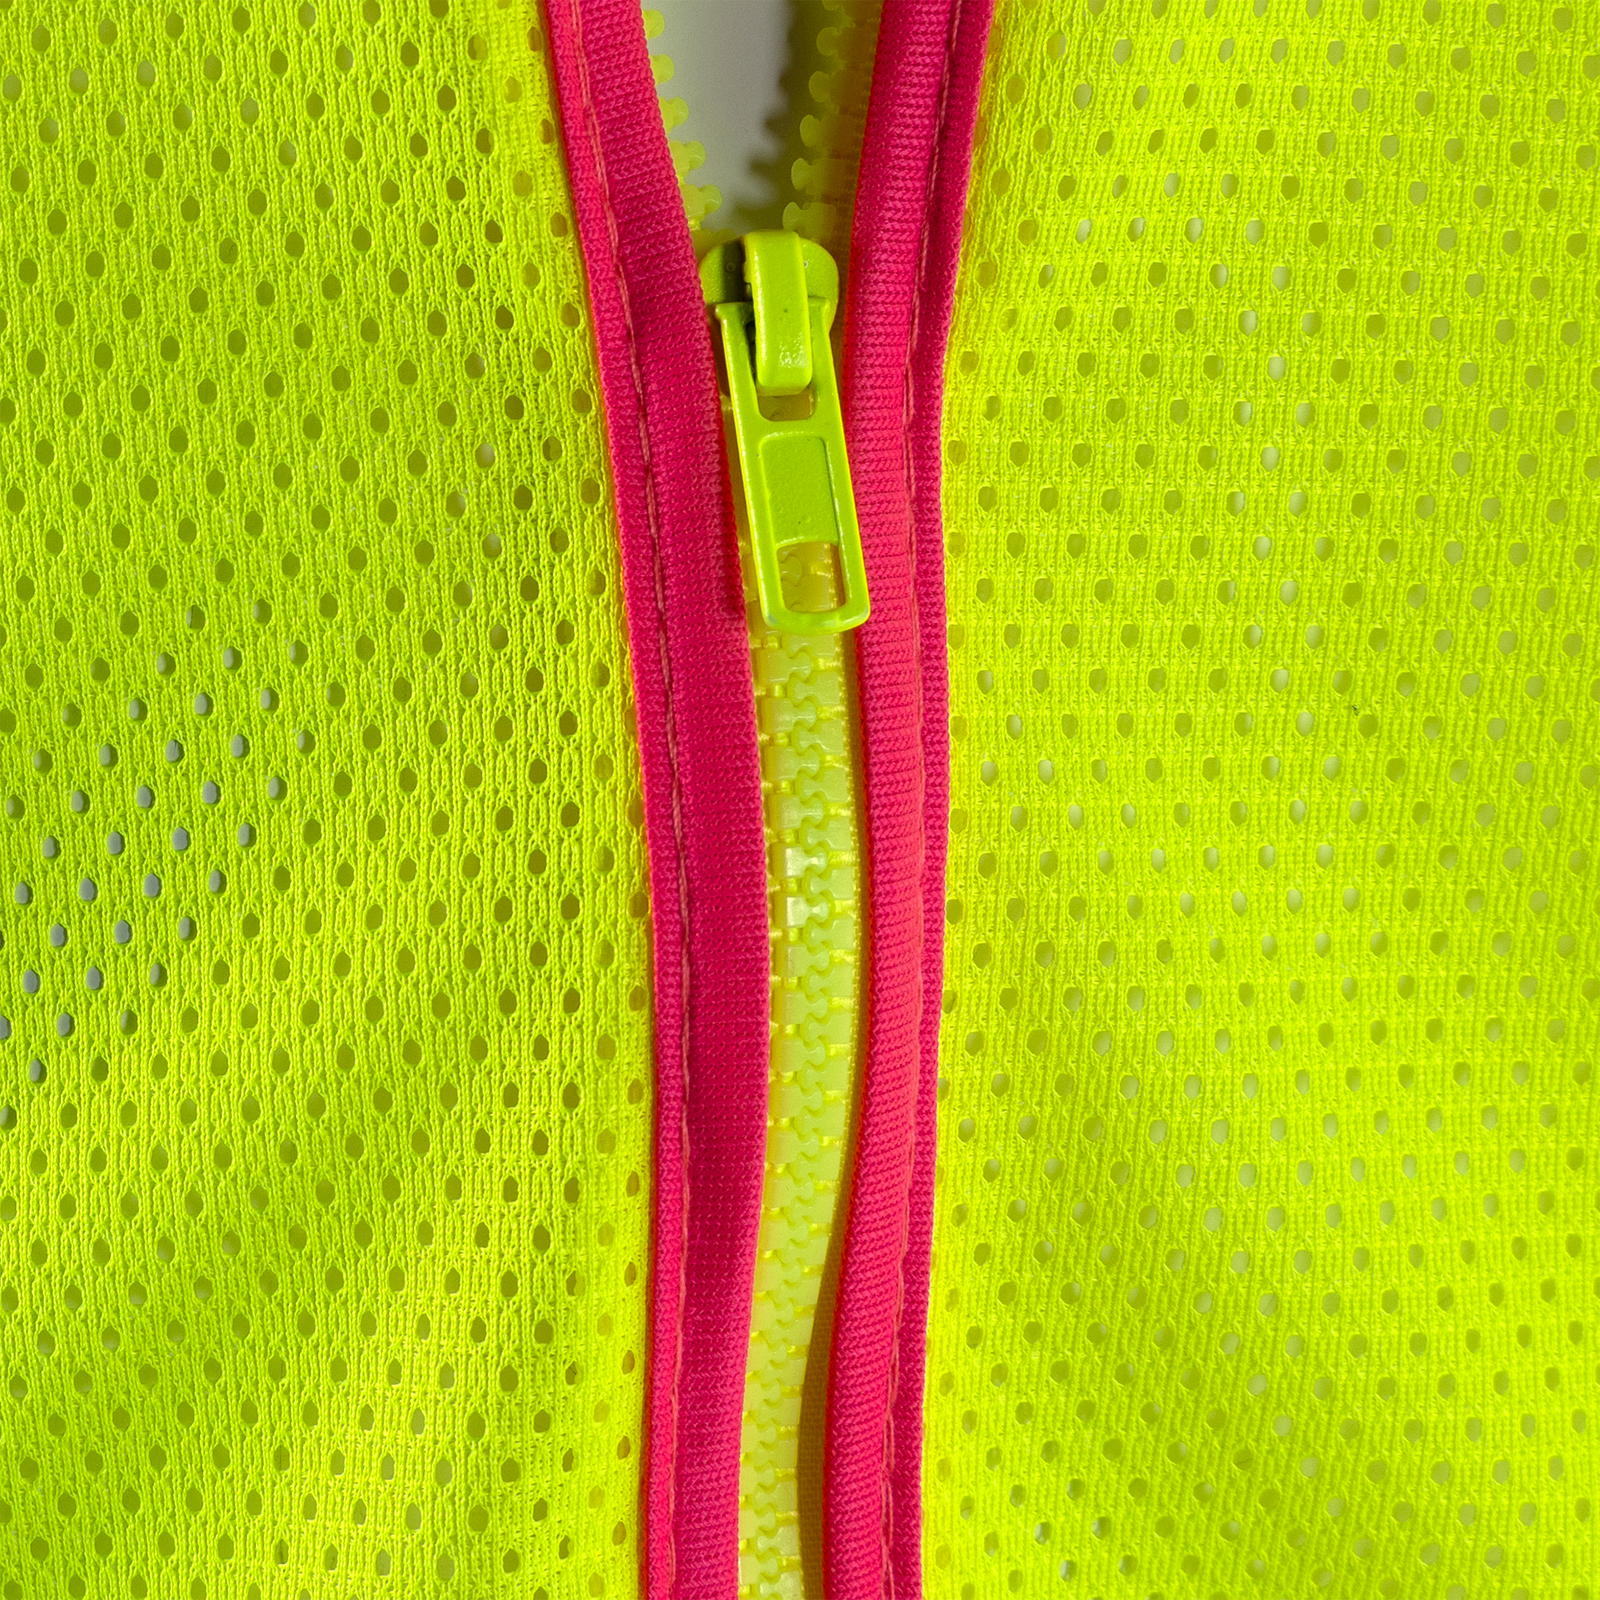 Yellow and pink Hi Vis safety vest with zipper and pockets